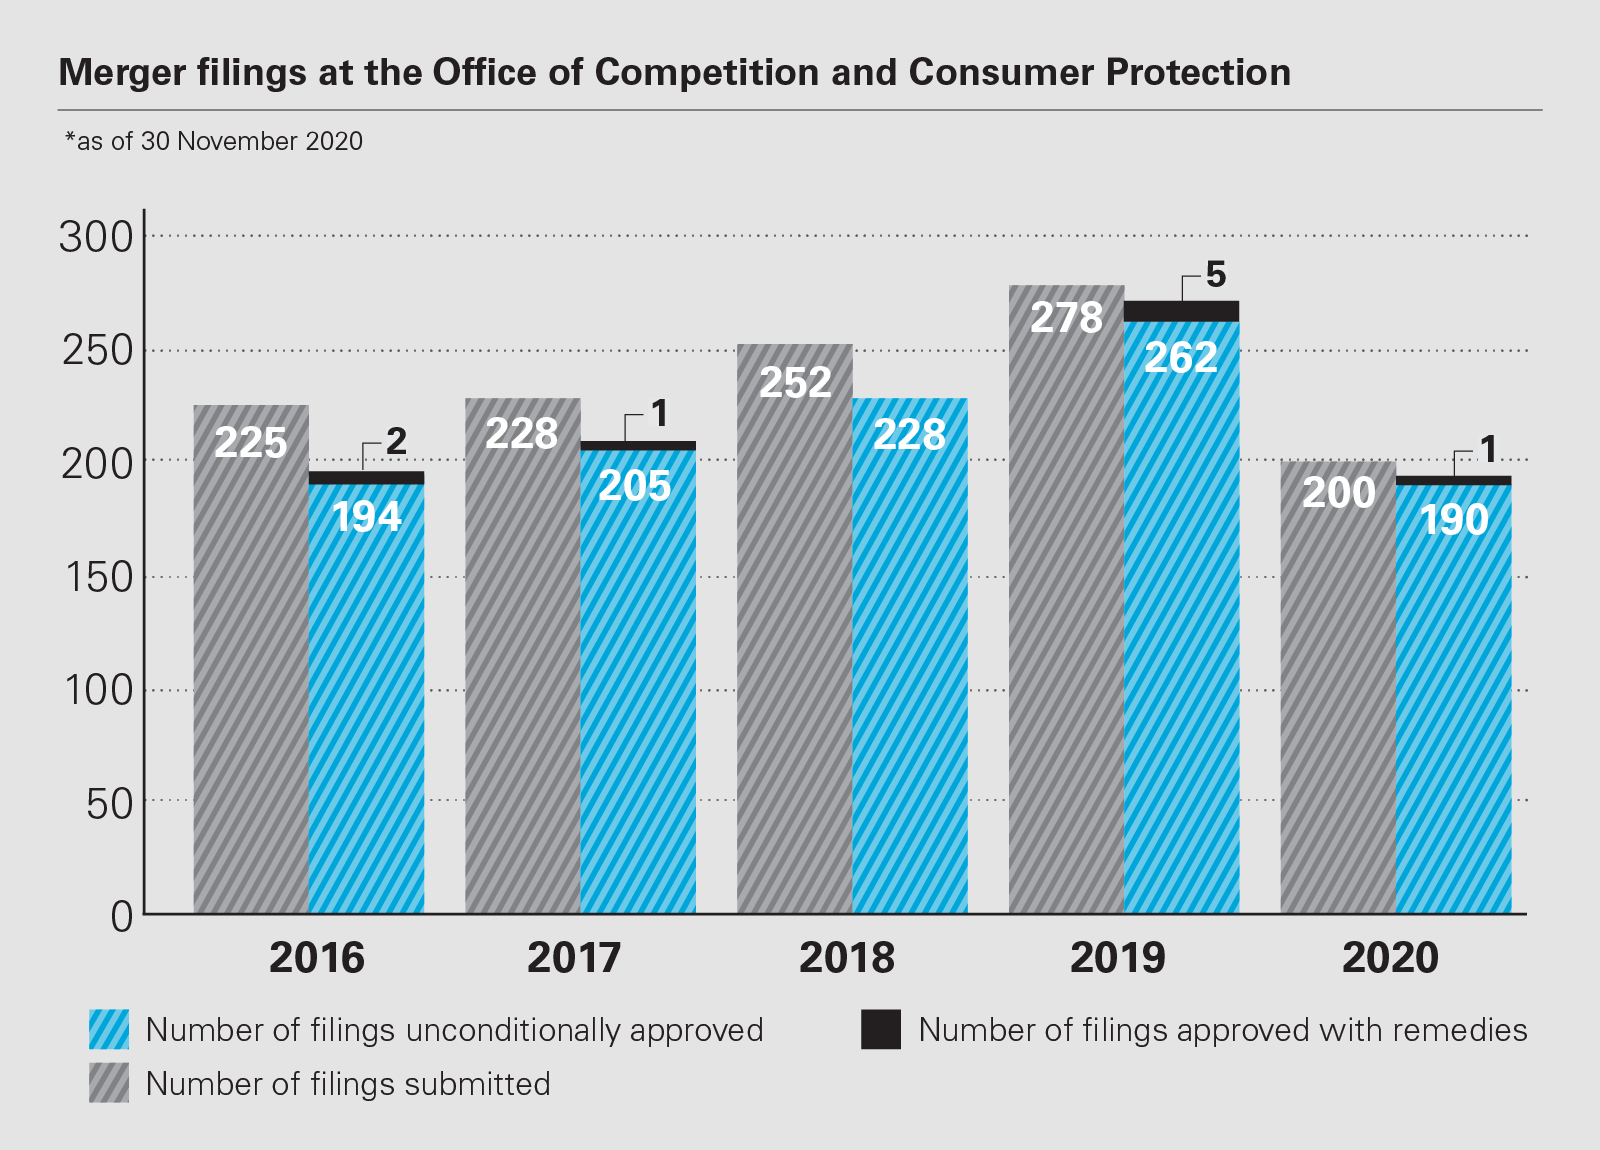 Merger filings at the Office of Competition and Consumer Protection (PDF)